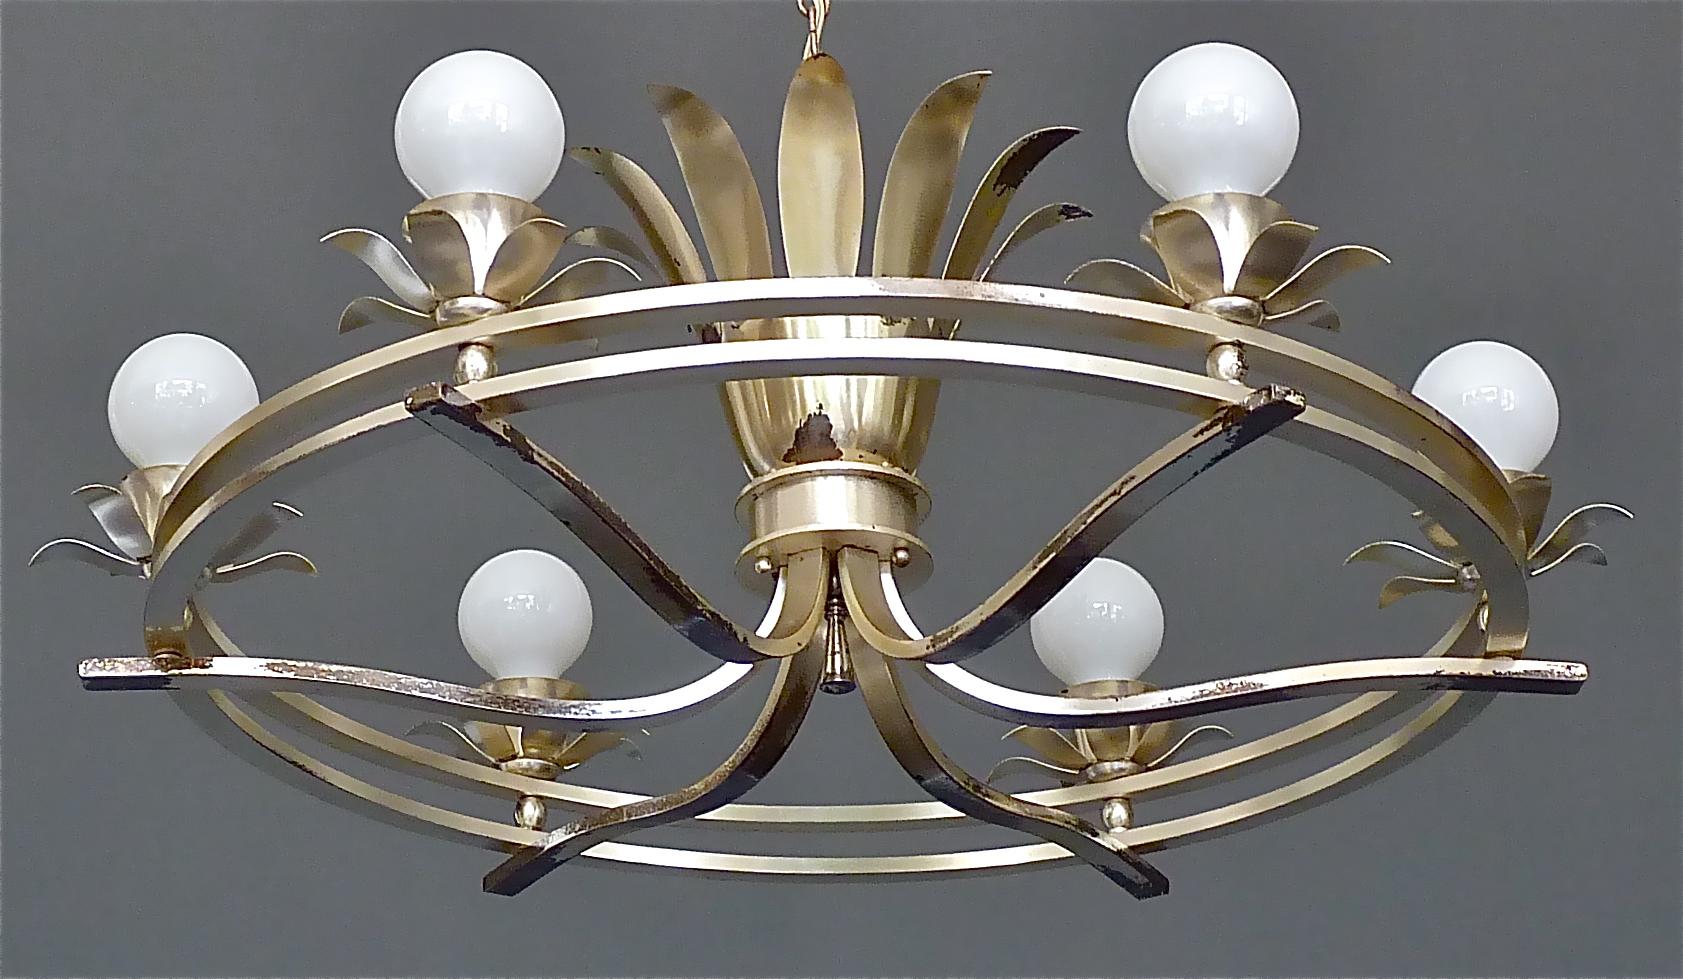 Huge elegant Art Deco chandelier with lovely leaf and flower details designed and executed in France in the 1930s. The silvered brass metal chandelier which originates from a Villa in Luxemburg is 80 cm / 31.50 inches tall and has a width of 85 cm /